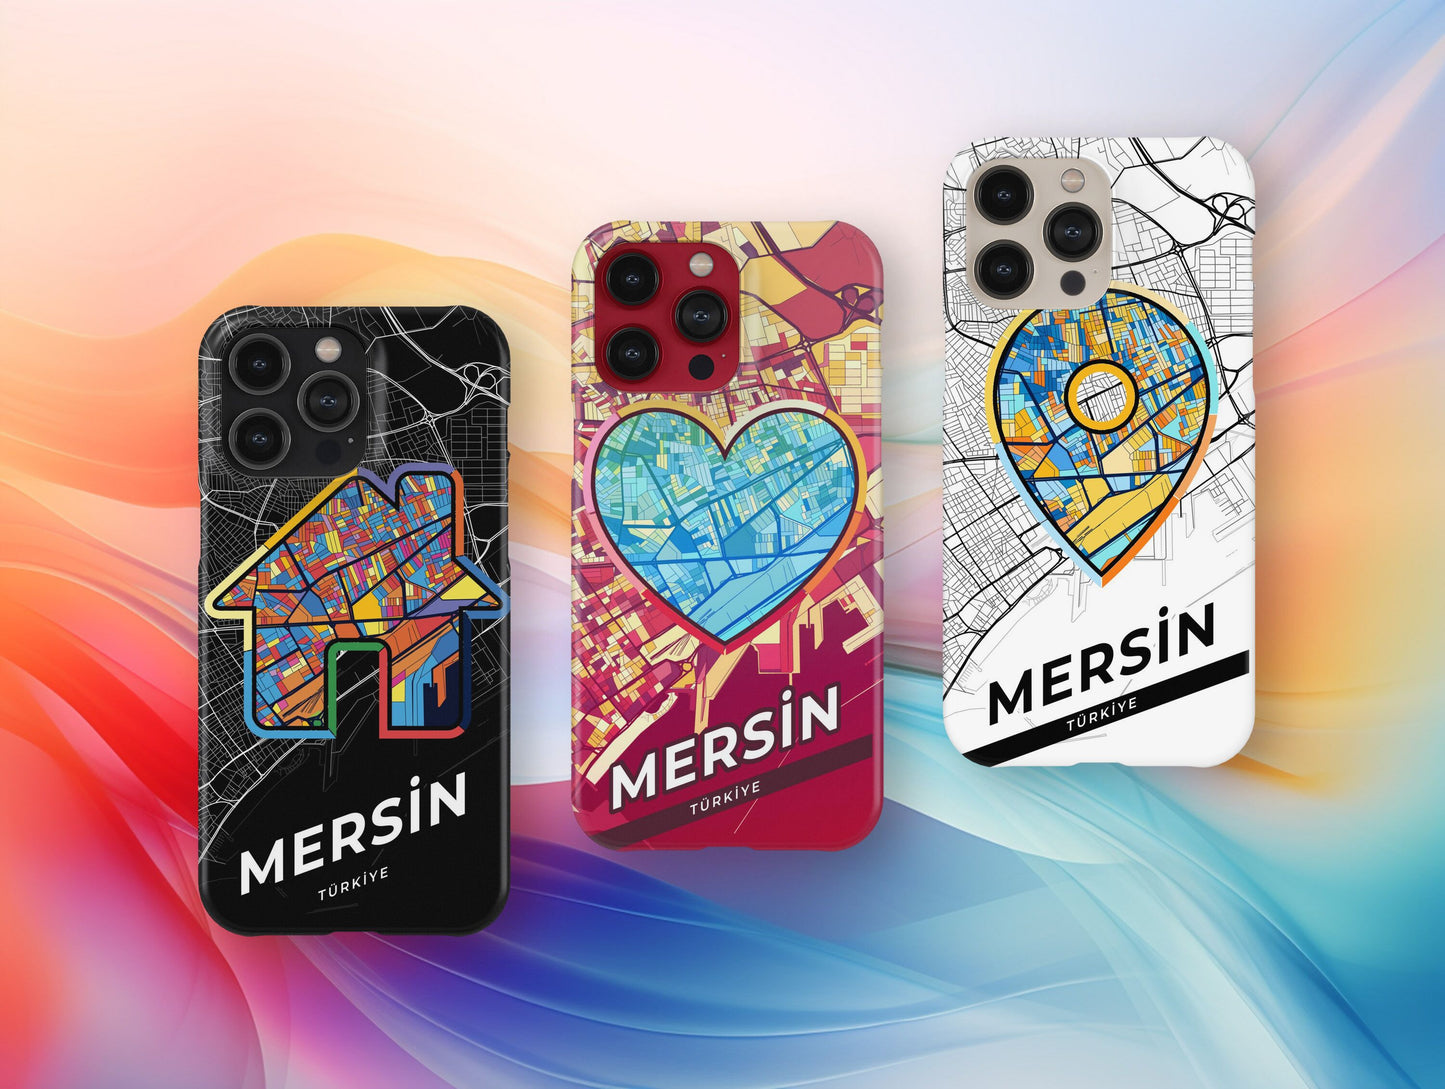 Mersin Turkey slim phone case with colorful icon